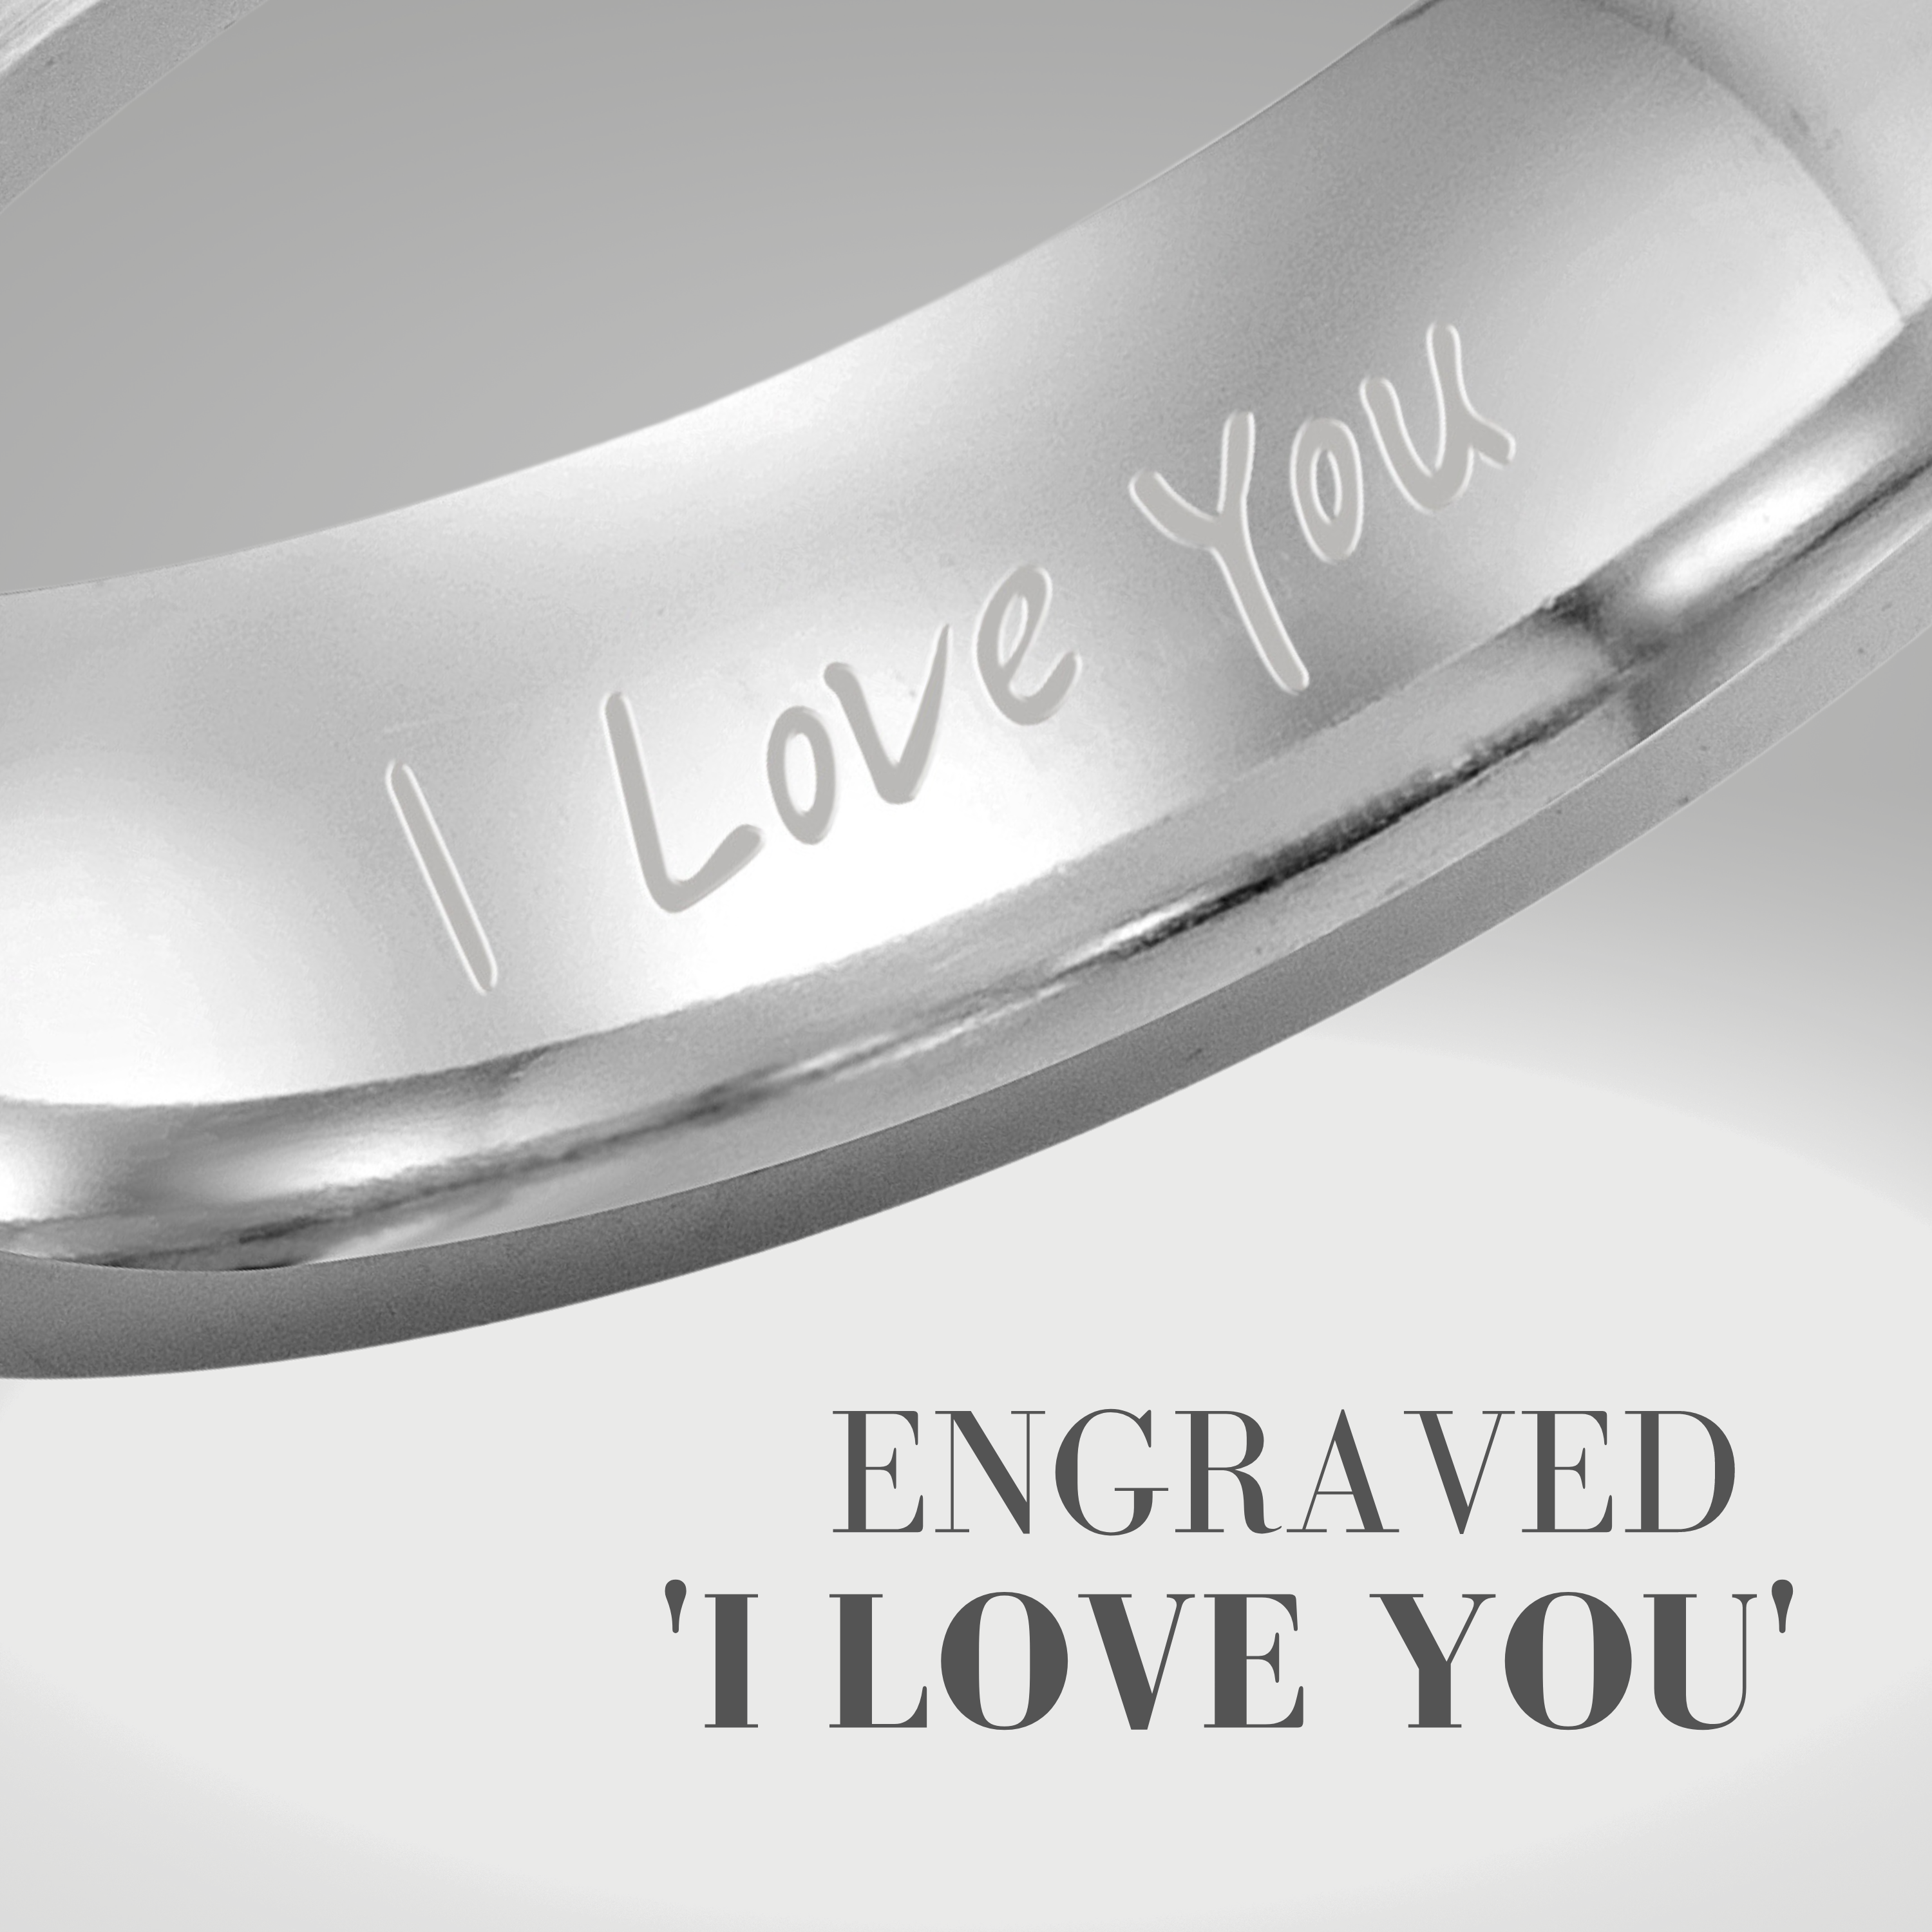 Mens 7mm Titanium Ring Etched I Love You